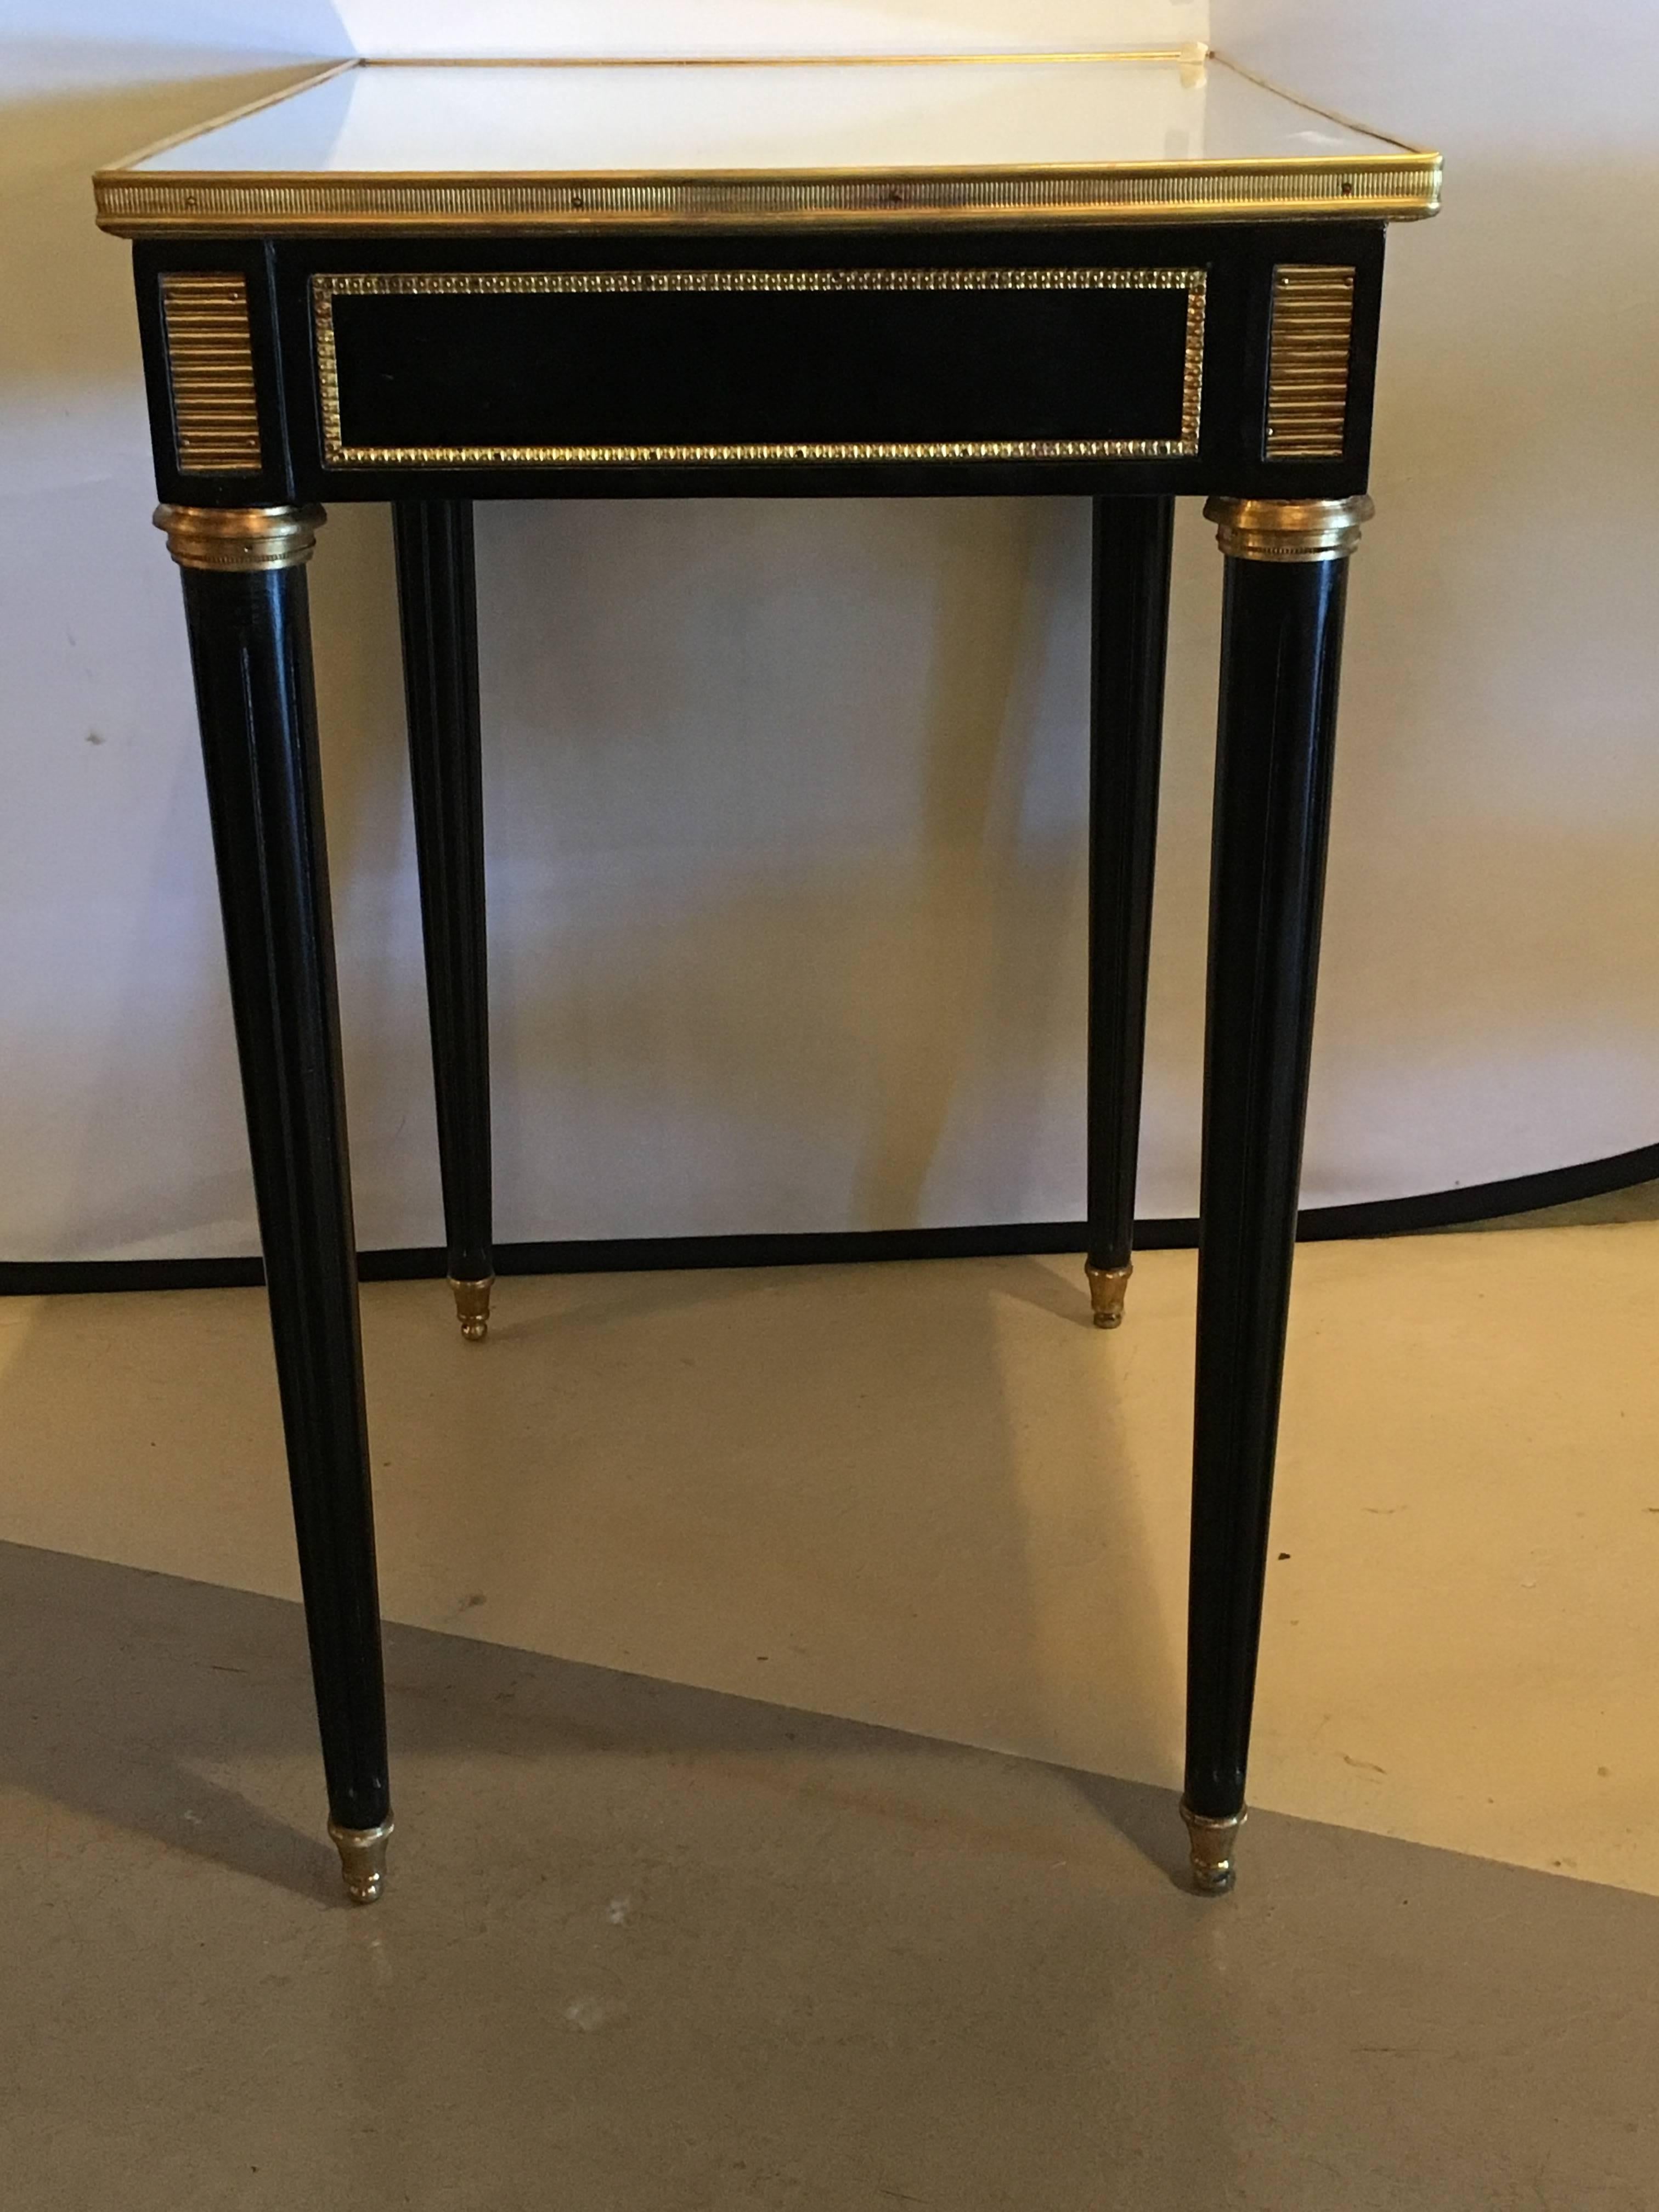 Pair of Jansen style ebonized mirror top end tables or stands. The Louis XVI style end or nightstands are finely ebonized having one drawer each. The mirrored bronze framed top leading to an apron which has been bronze framed and has cookie cutter